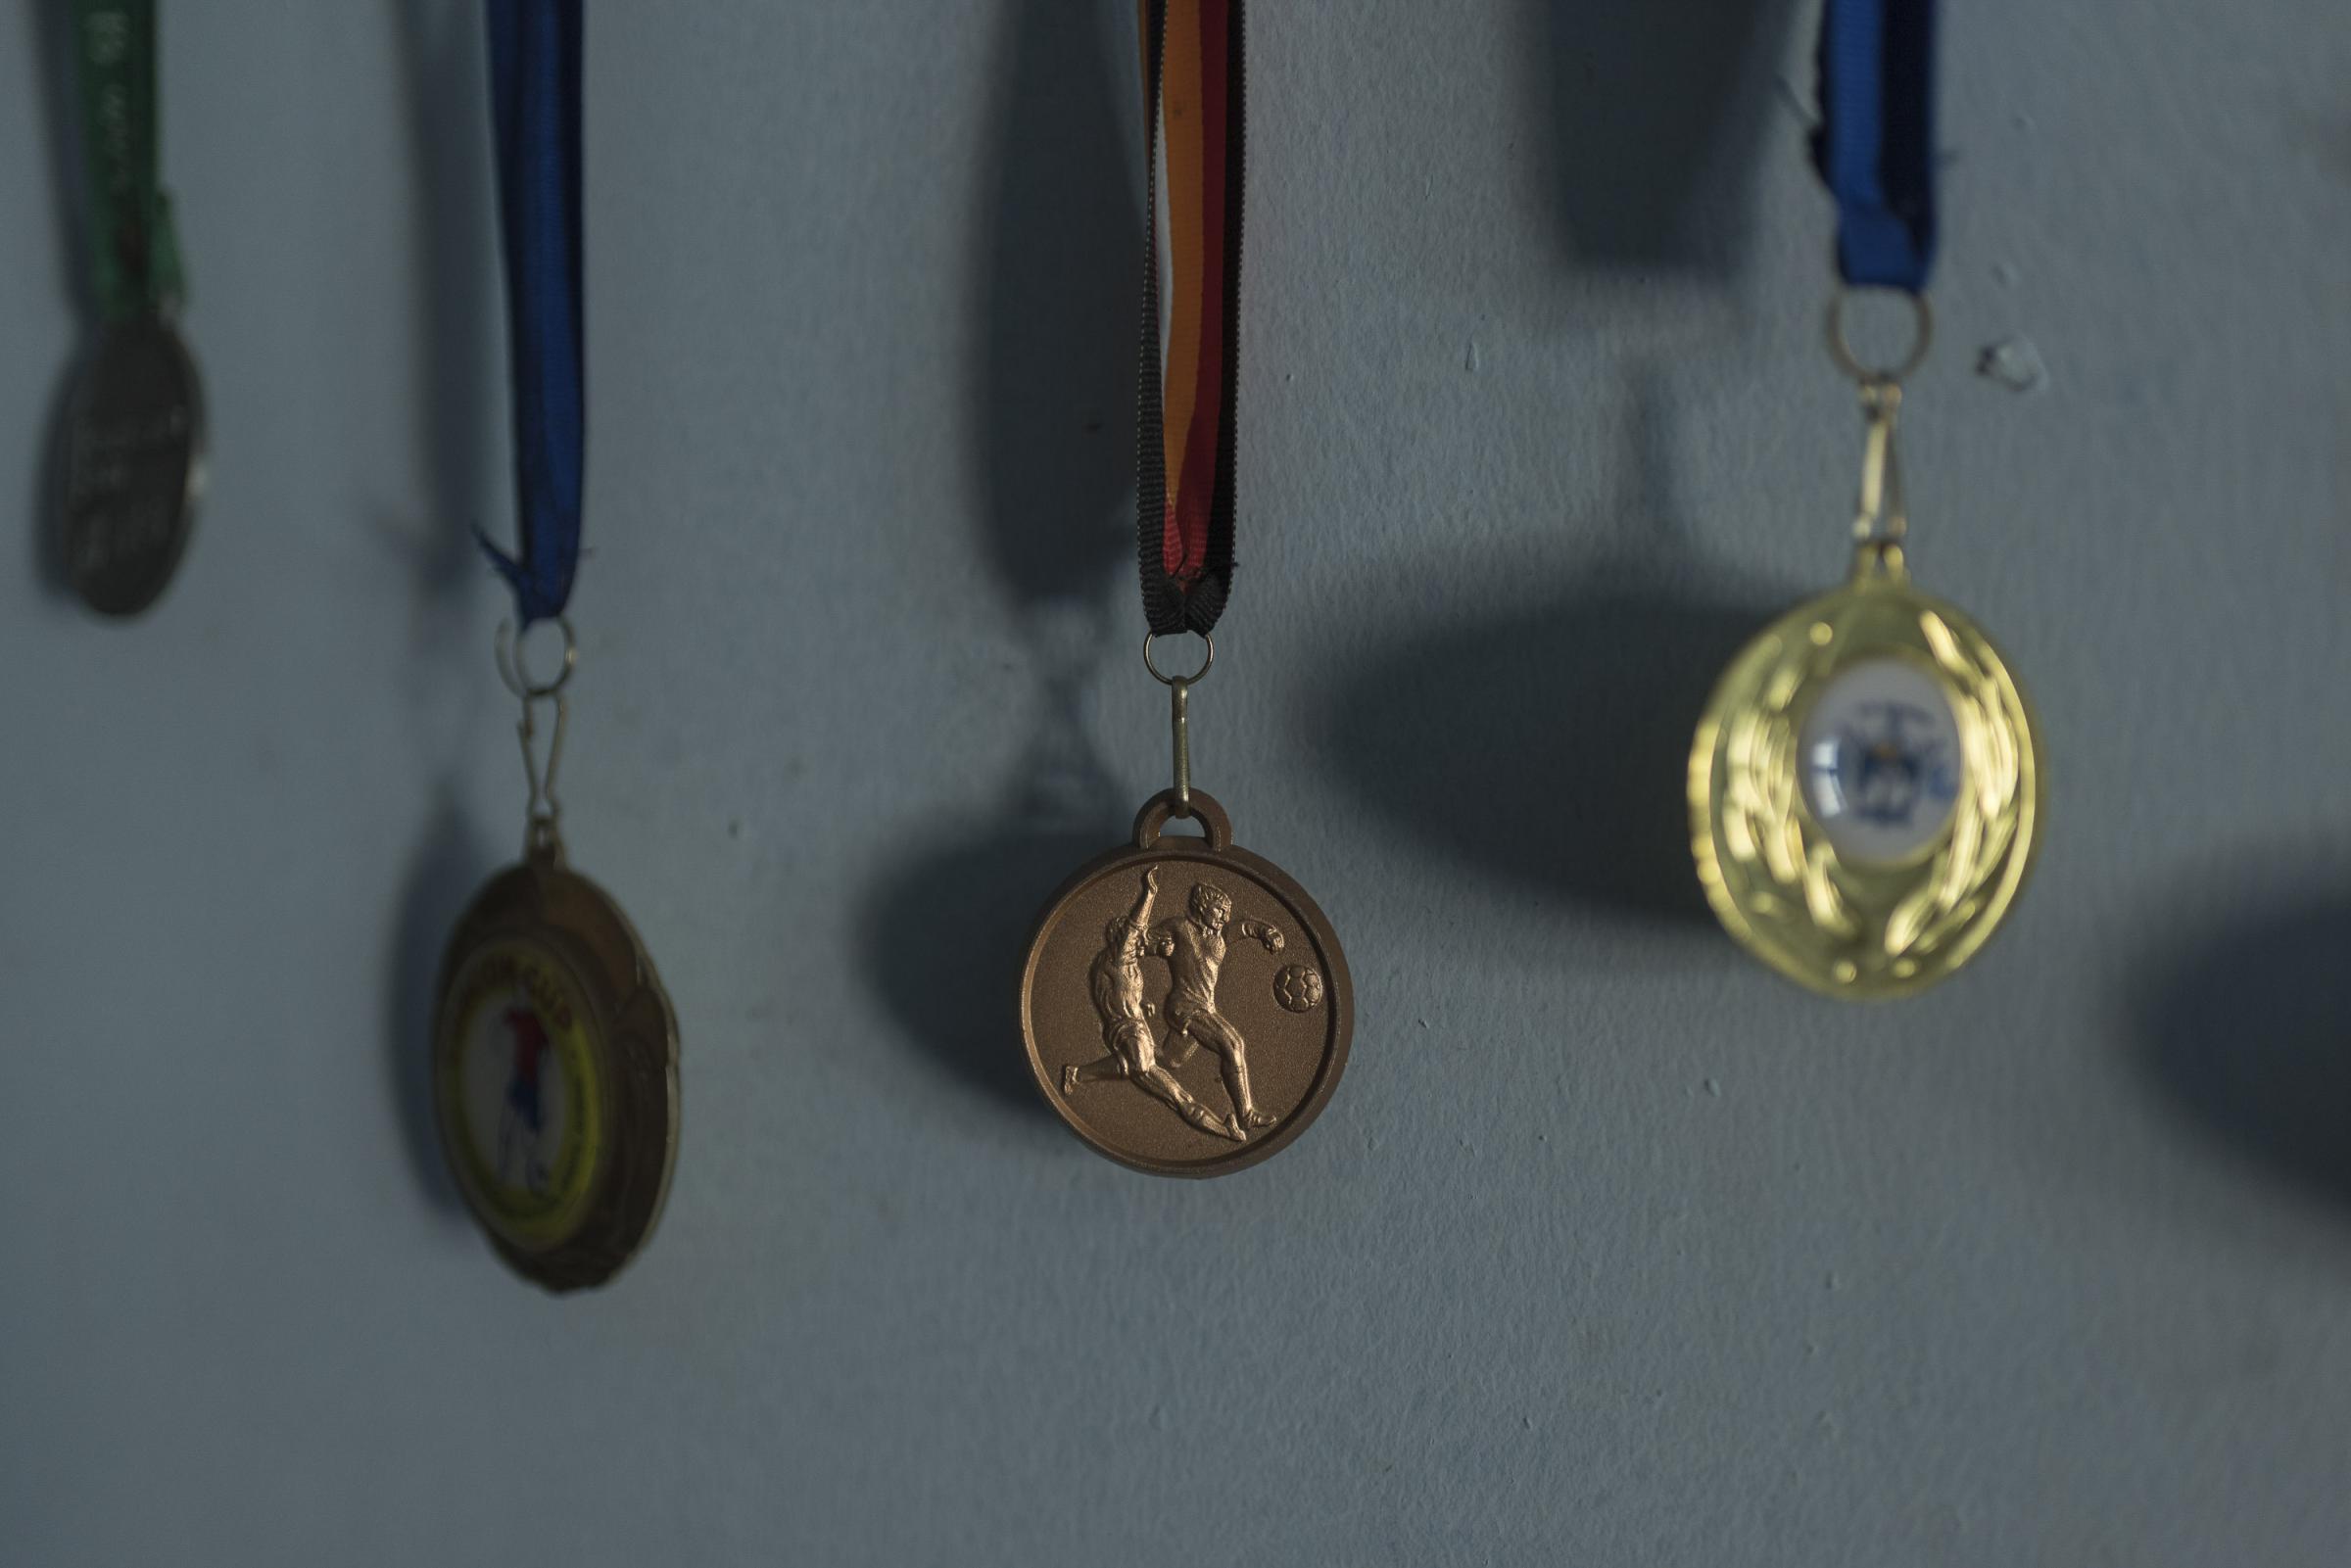 VII ACADEMY - VII Foundation - Medals from local soccer tournaments belonging to Manuel....